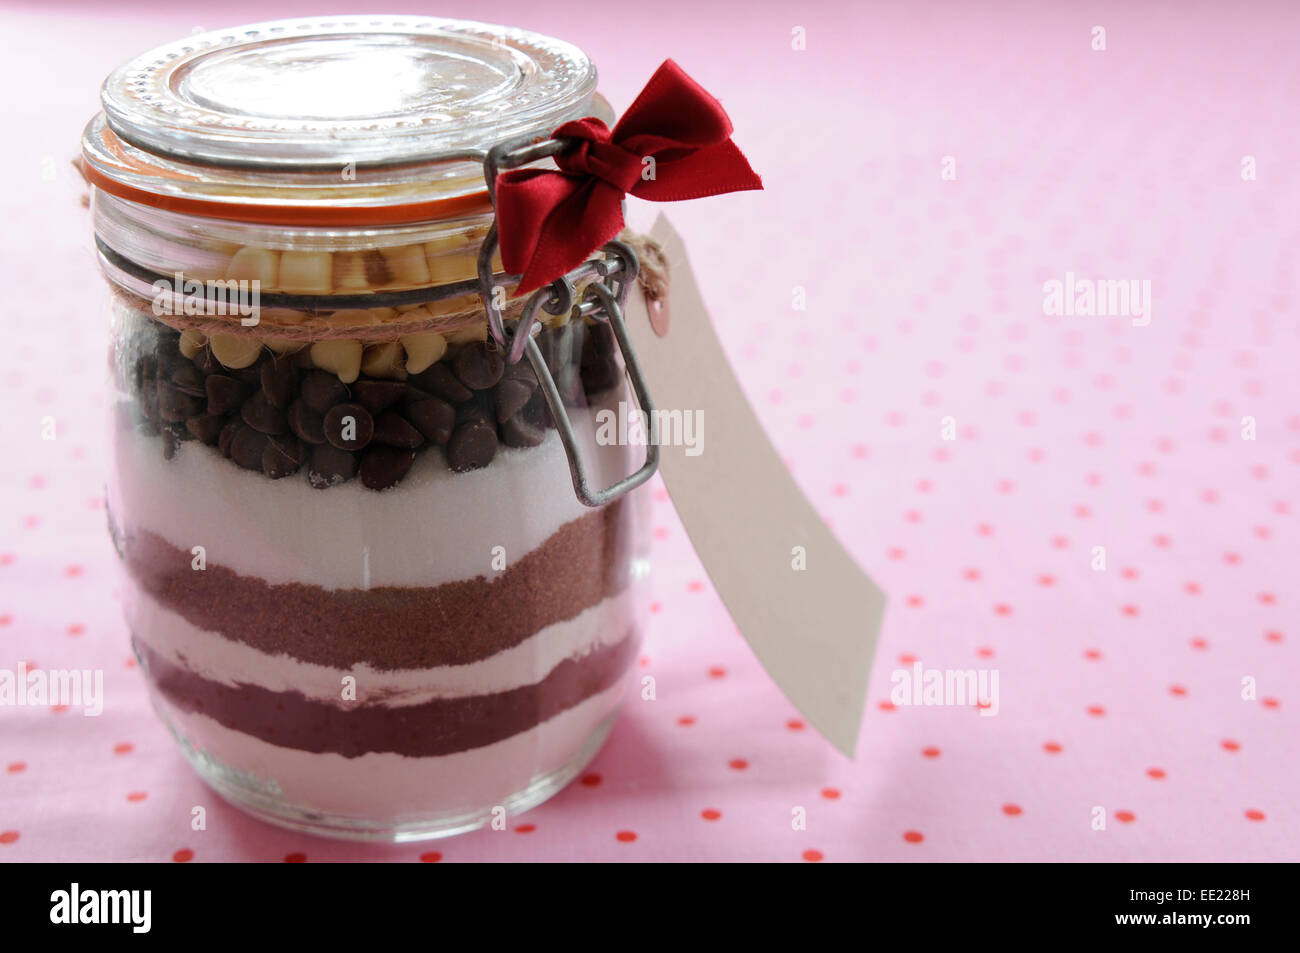 glass jar filled with ingredients to make chocolate chip cookies, on a pink and red polka dot background Stock Photo